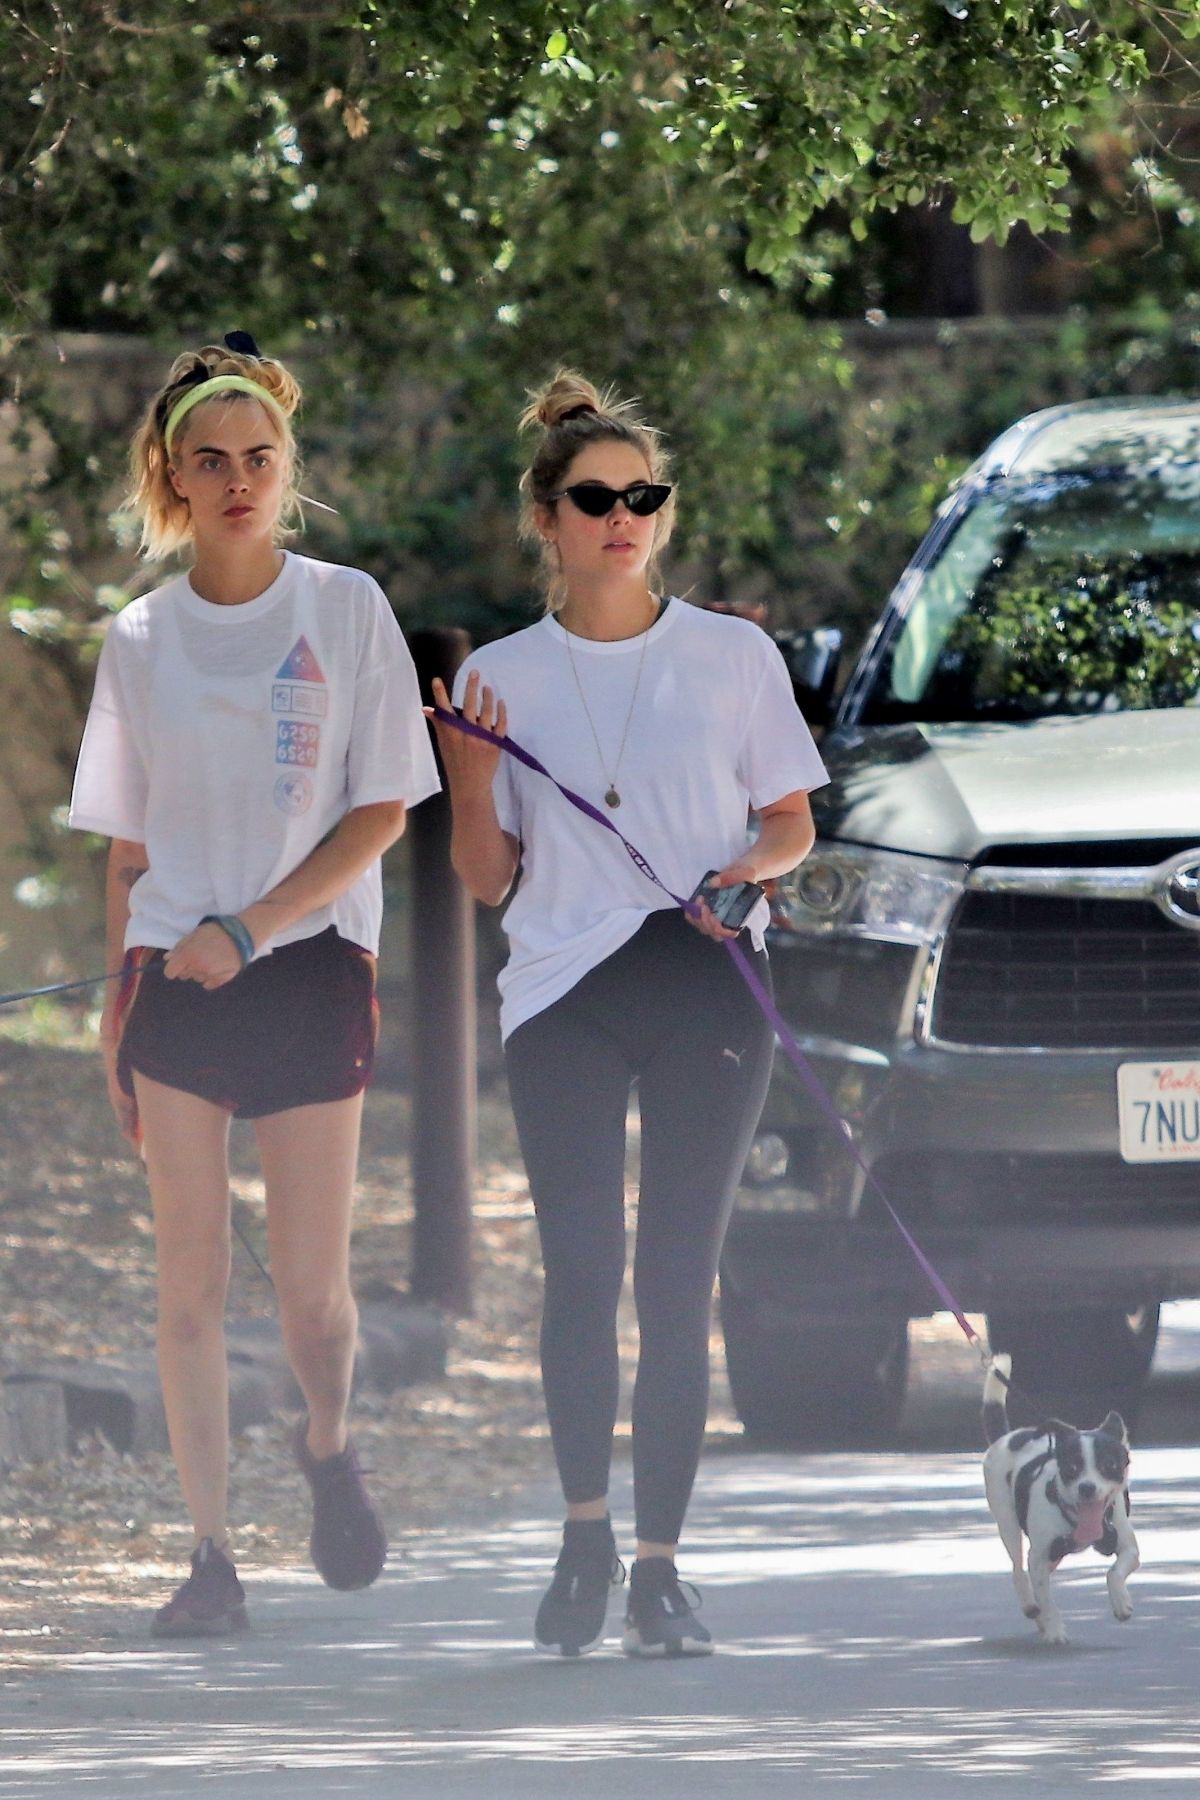 ashley-benson-and-cara-delevingne-out-with-their-dogs-in-studio-city-05-29-2019-2.jpg